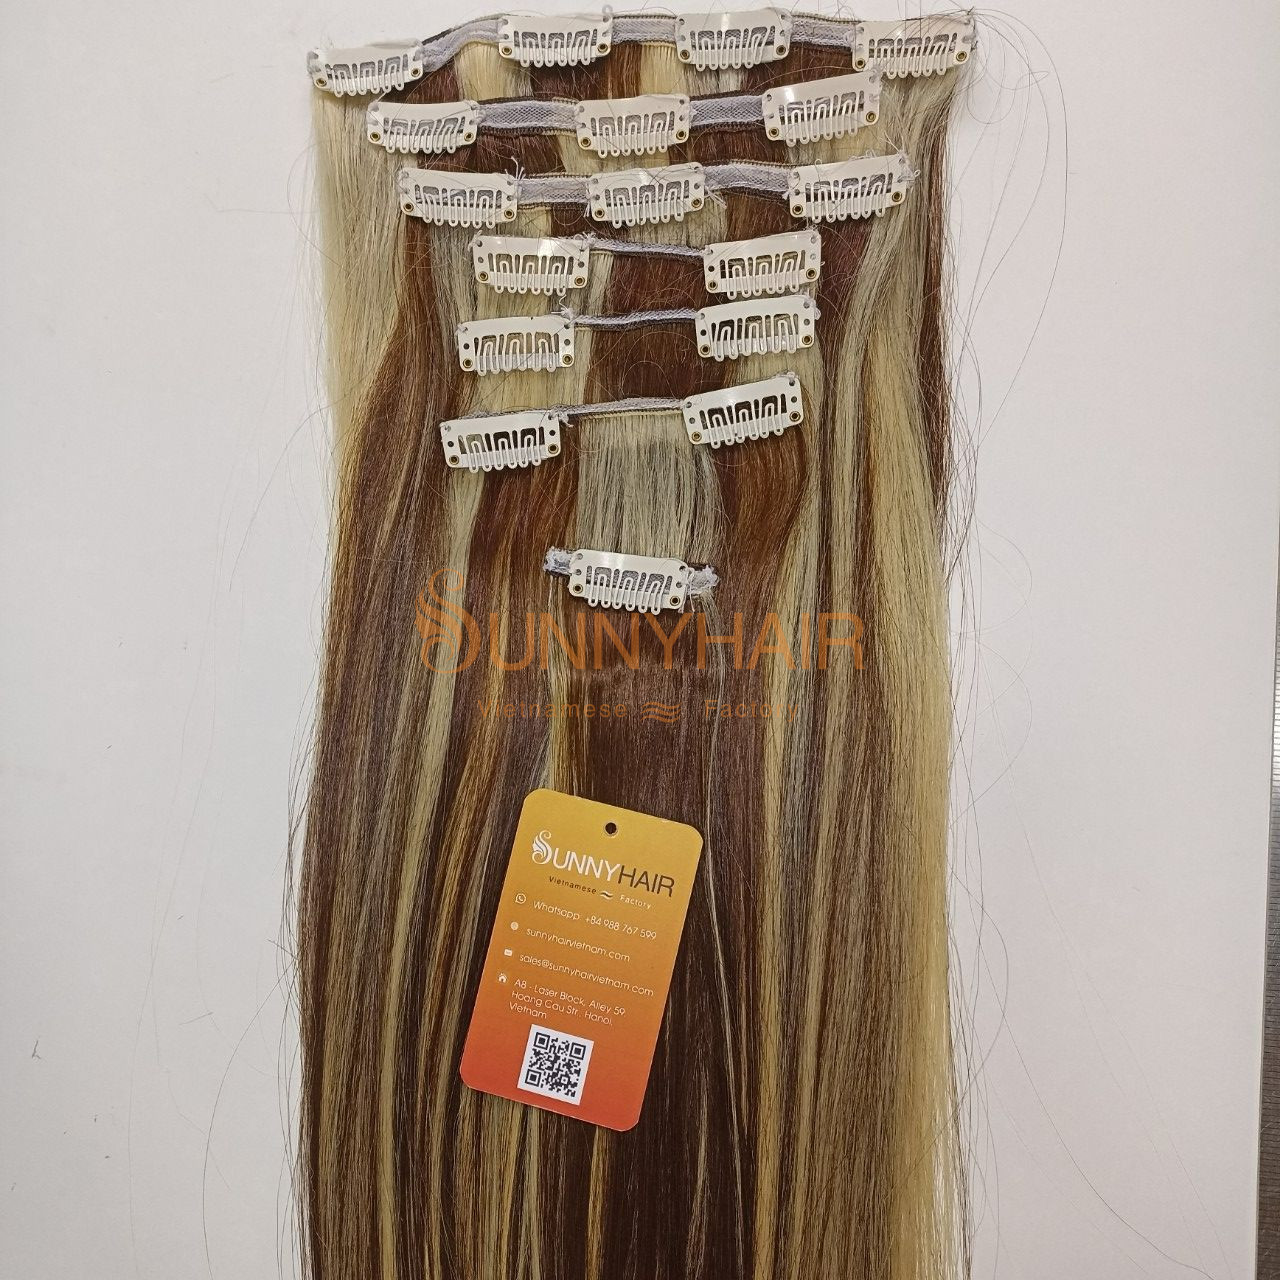 Virgin Straight 100% Vietnamese Clip-in Hair Extensions in all colors